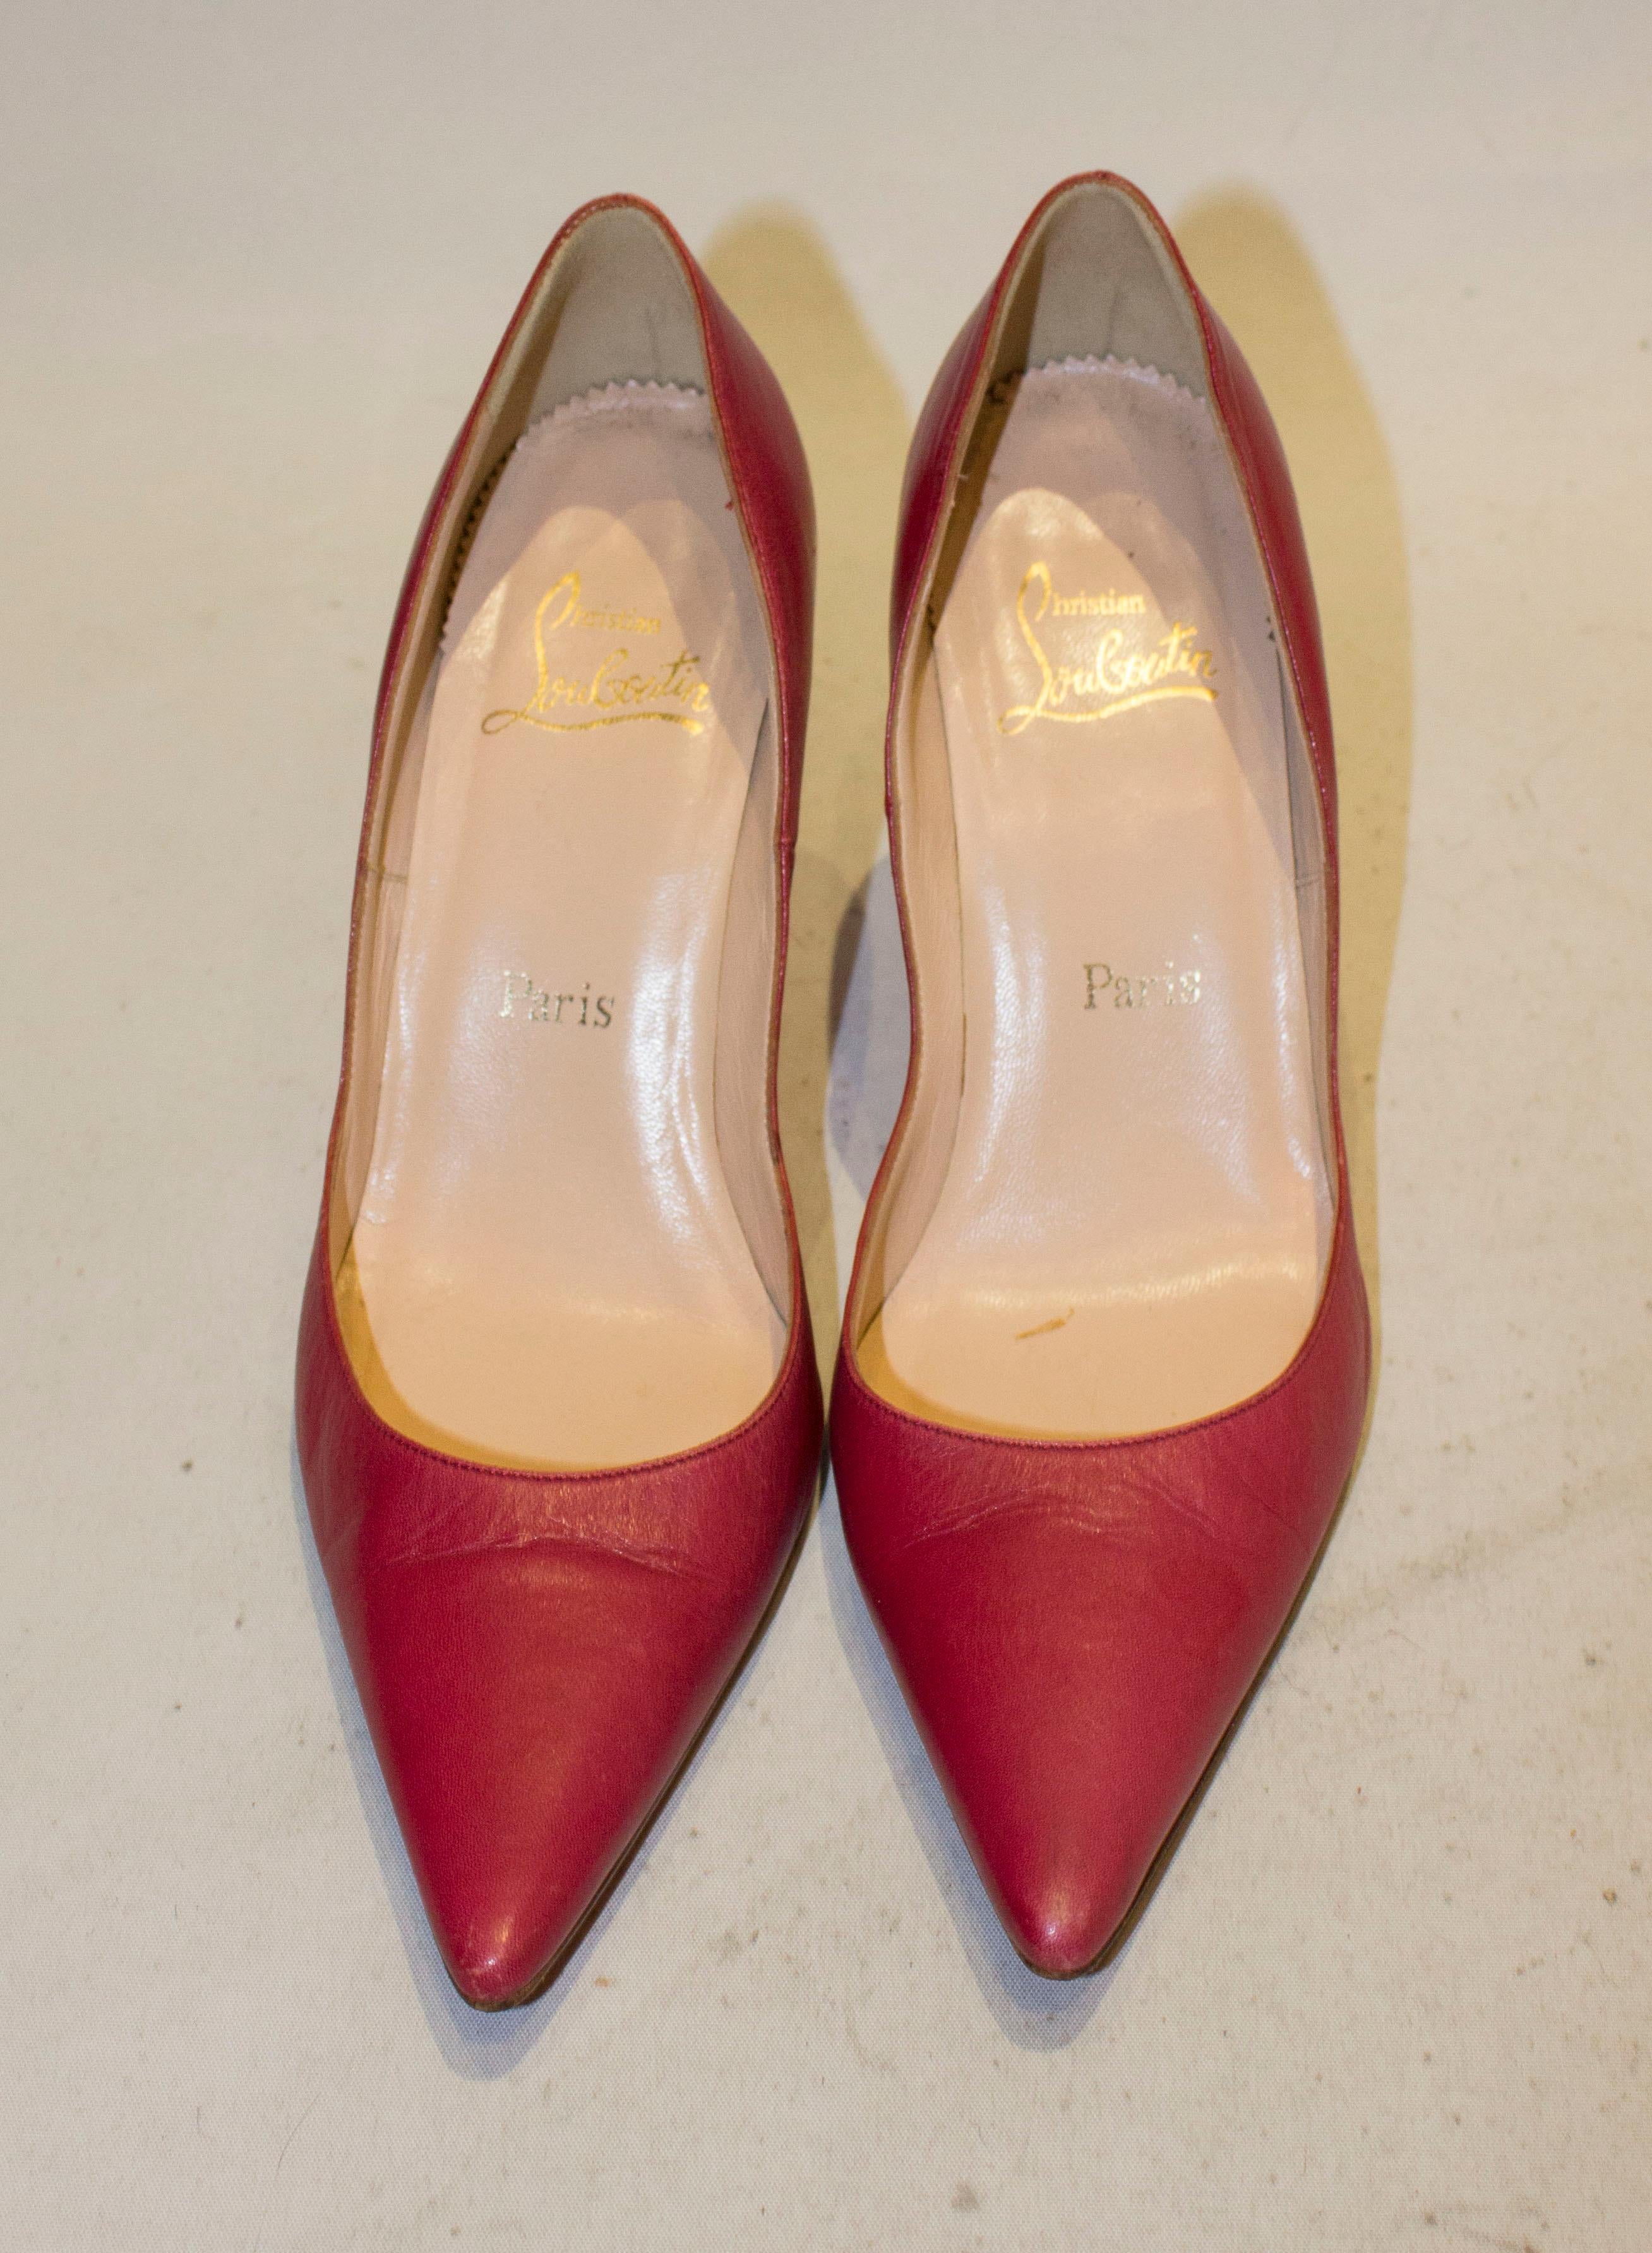 A fun pair of cerise pink leather heels by Christian Louboutin The shoes have stilleto heels, are leather lined and size 38 1/2 with a 4'' heel.